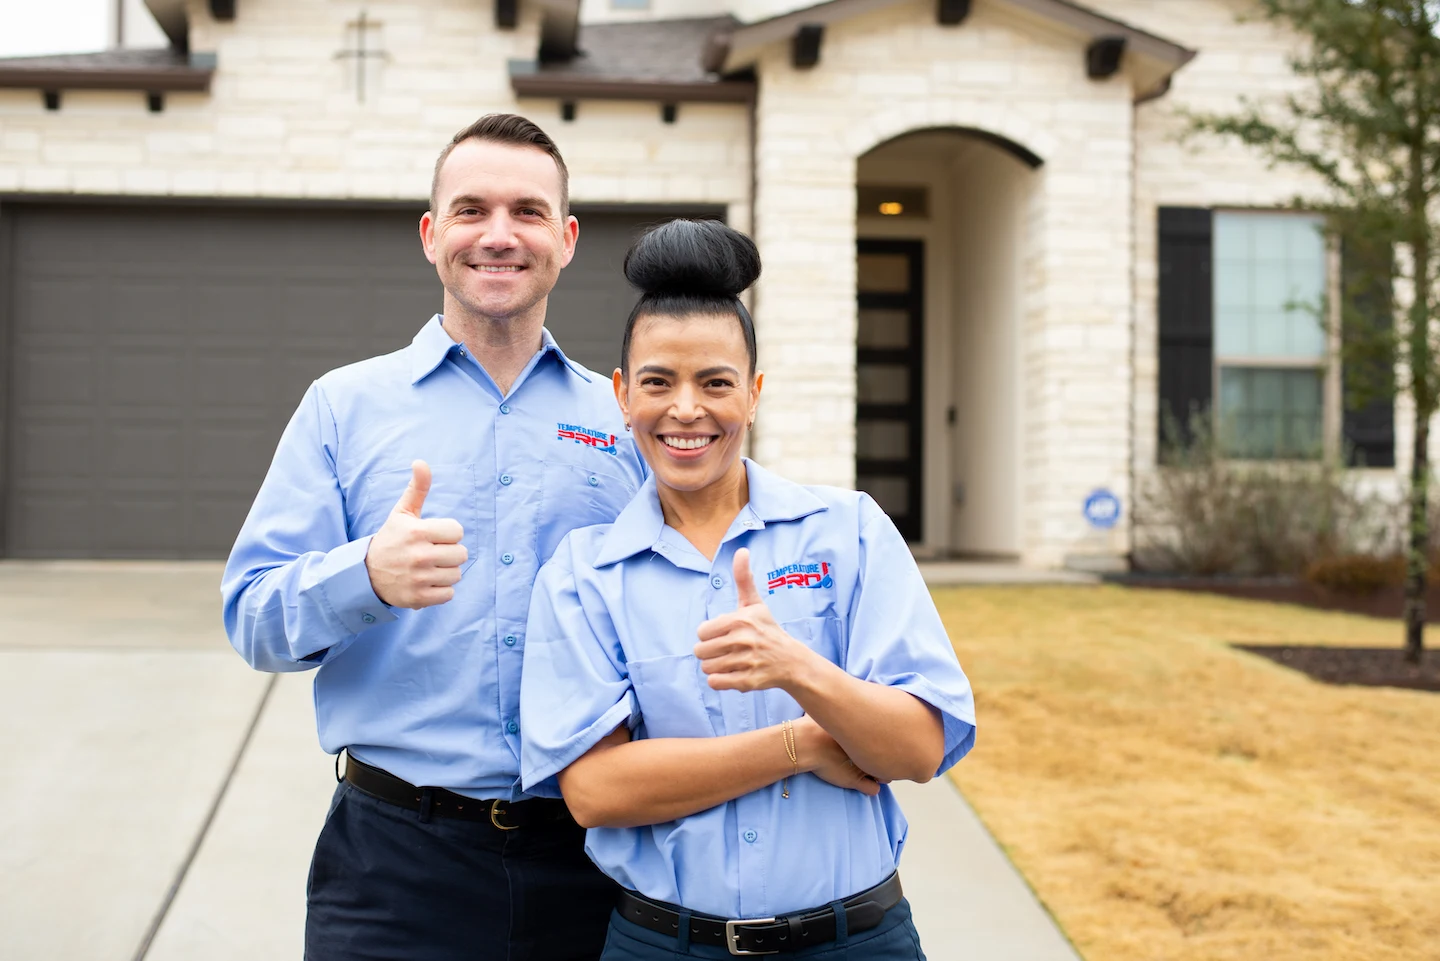 Your HVAC Career Your Way: Opportunities & Perks, Job Security, & A Positive Atmosphere